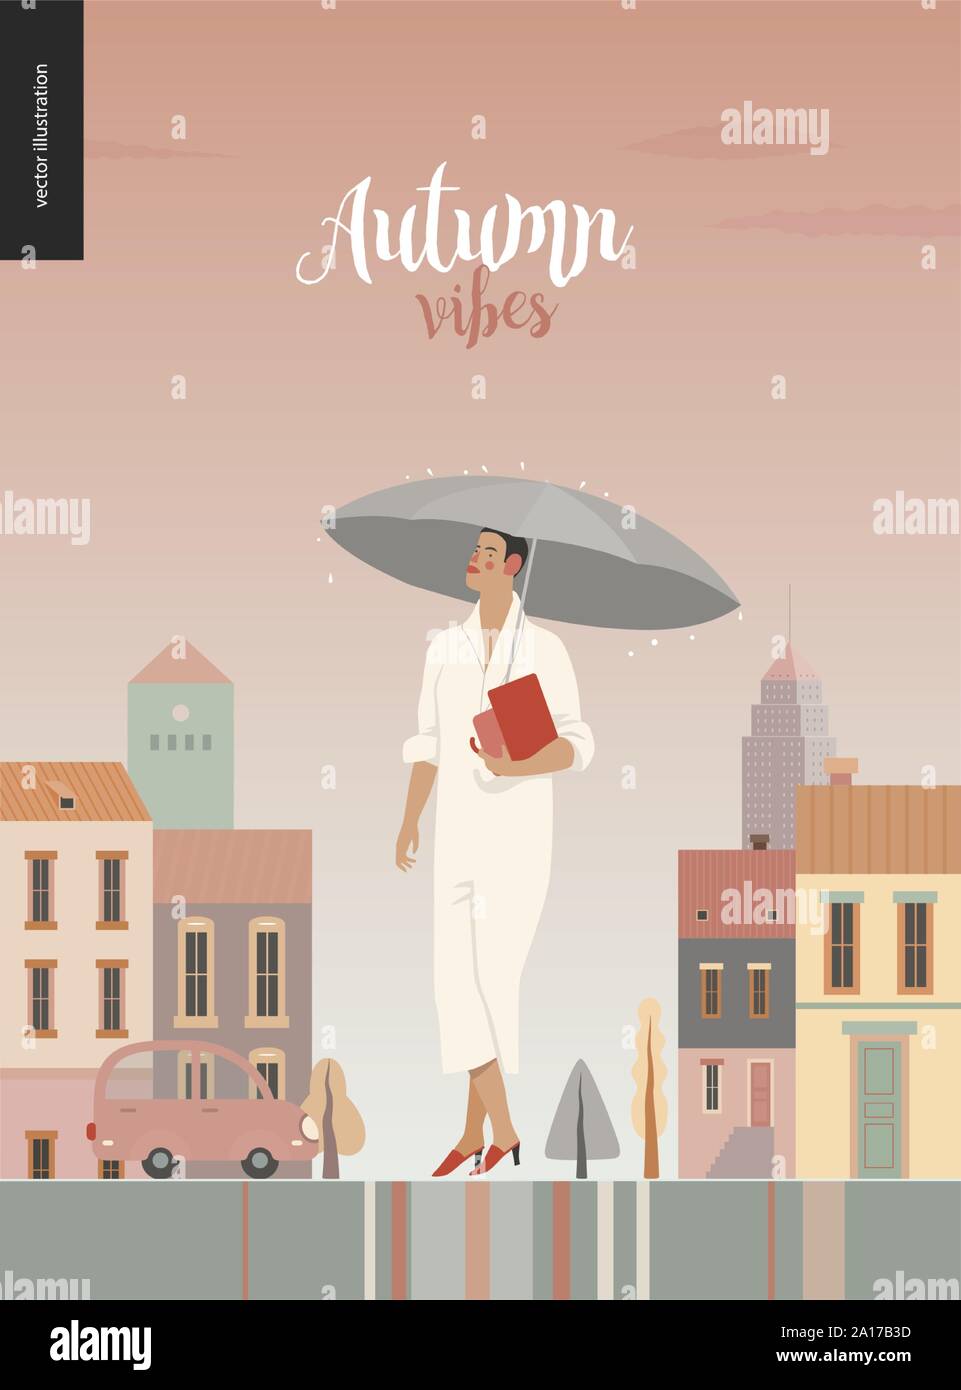 Rain - standing woman - modern flat vector concept illustration of an adult brunette woman wearing white, with umbrella and purse, standing in the rai Stock Vector